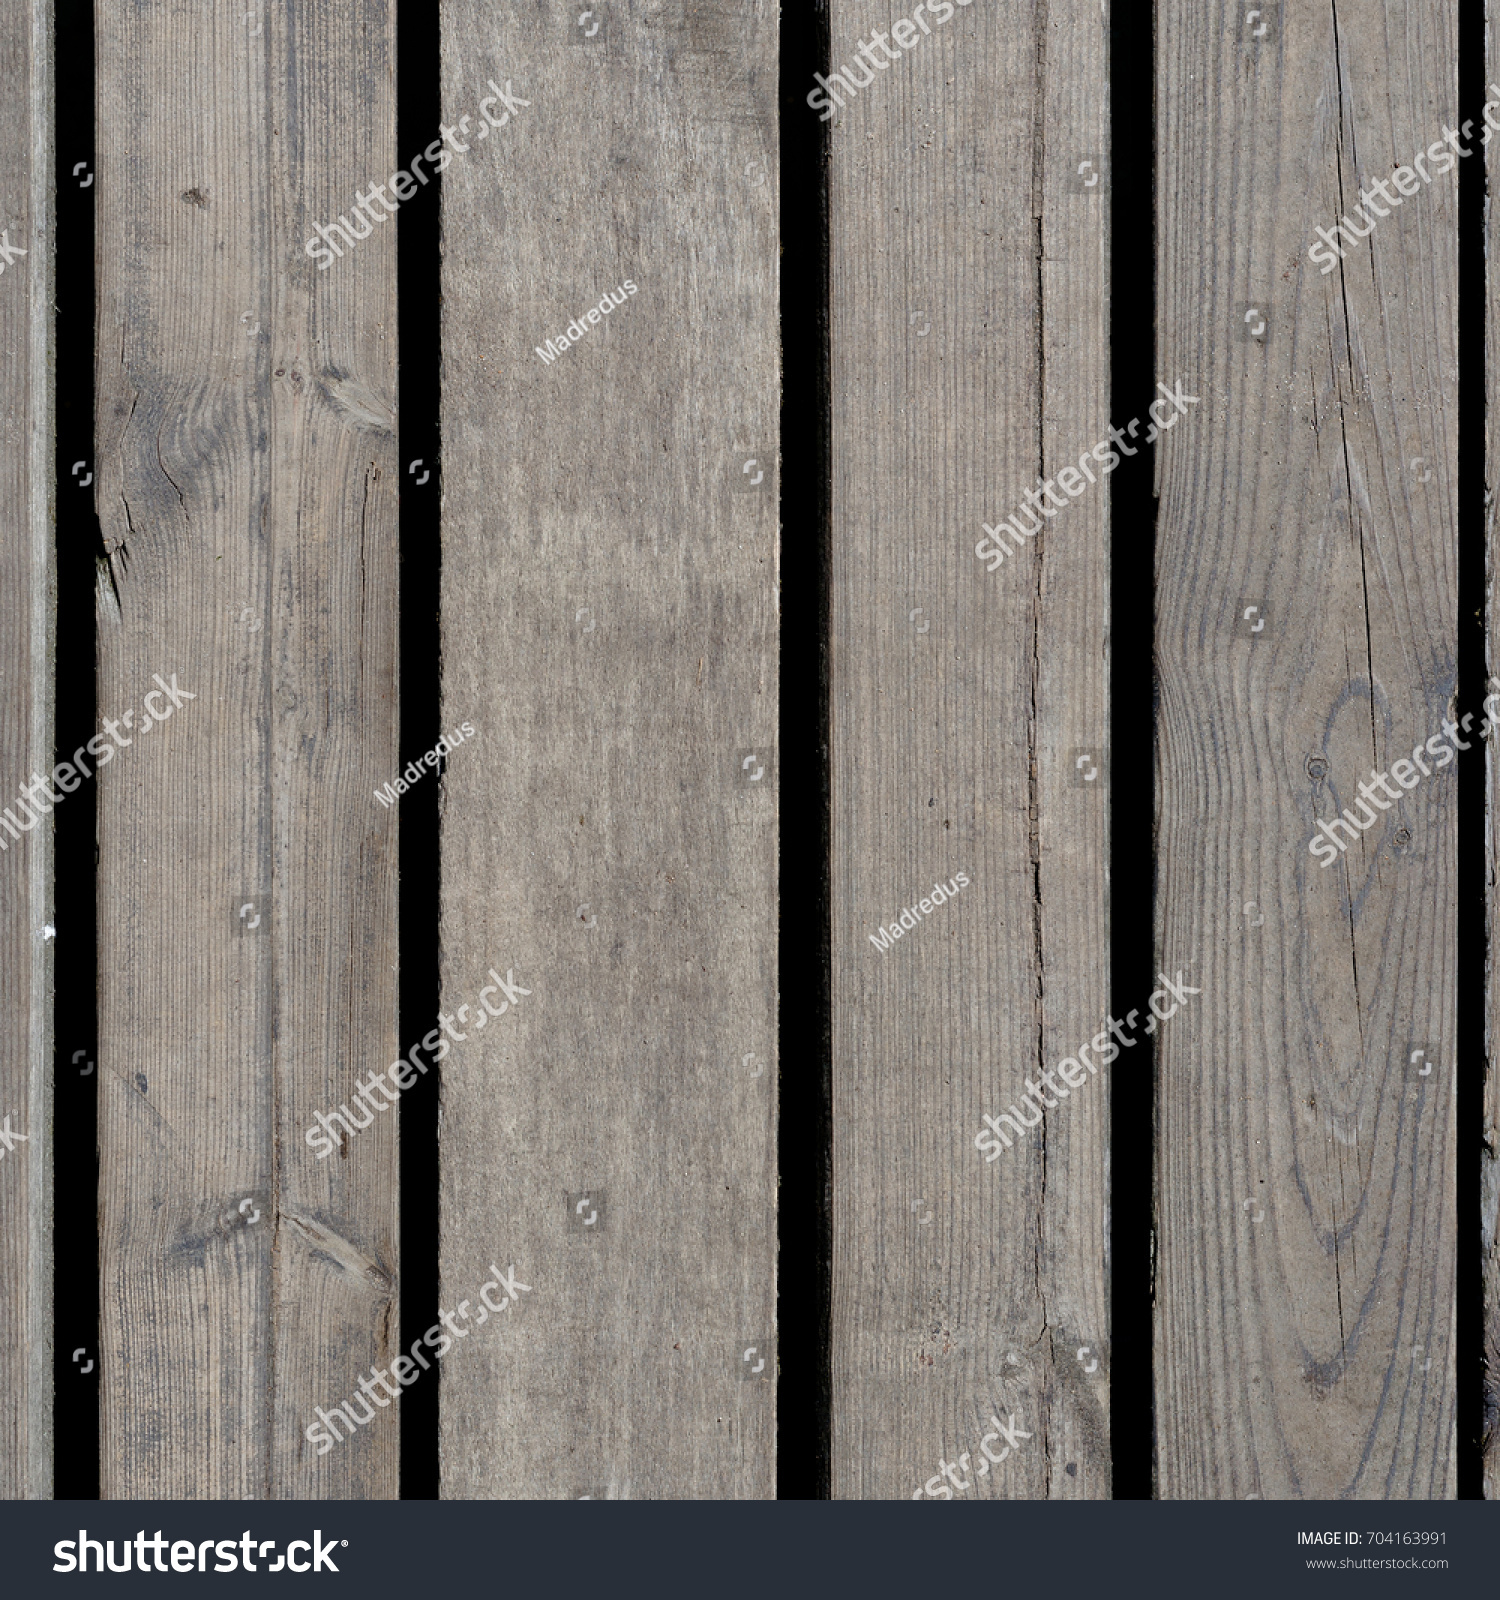 The old wood texture with natural patterns #704163991